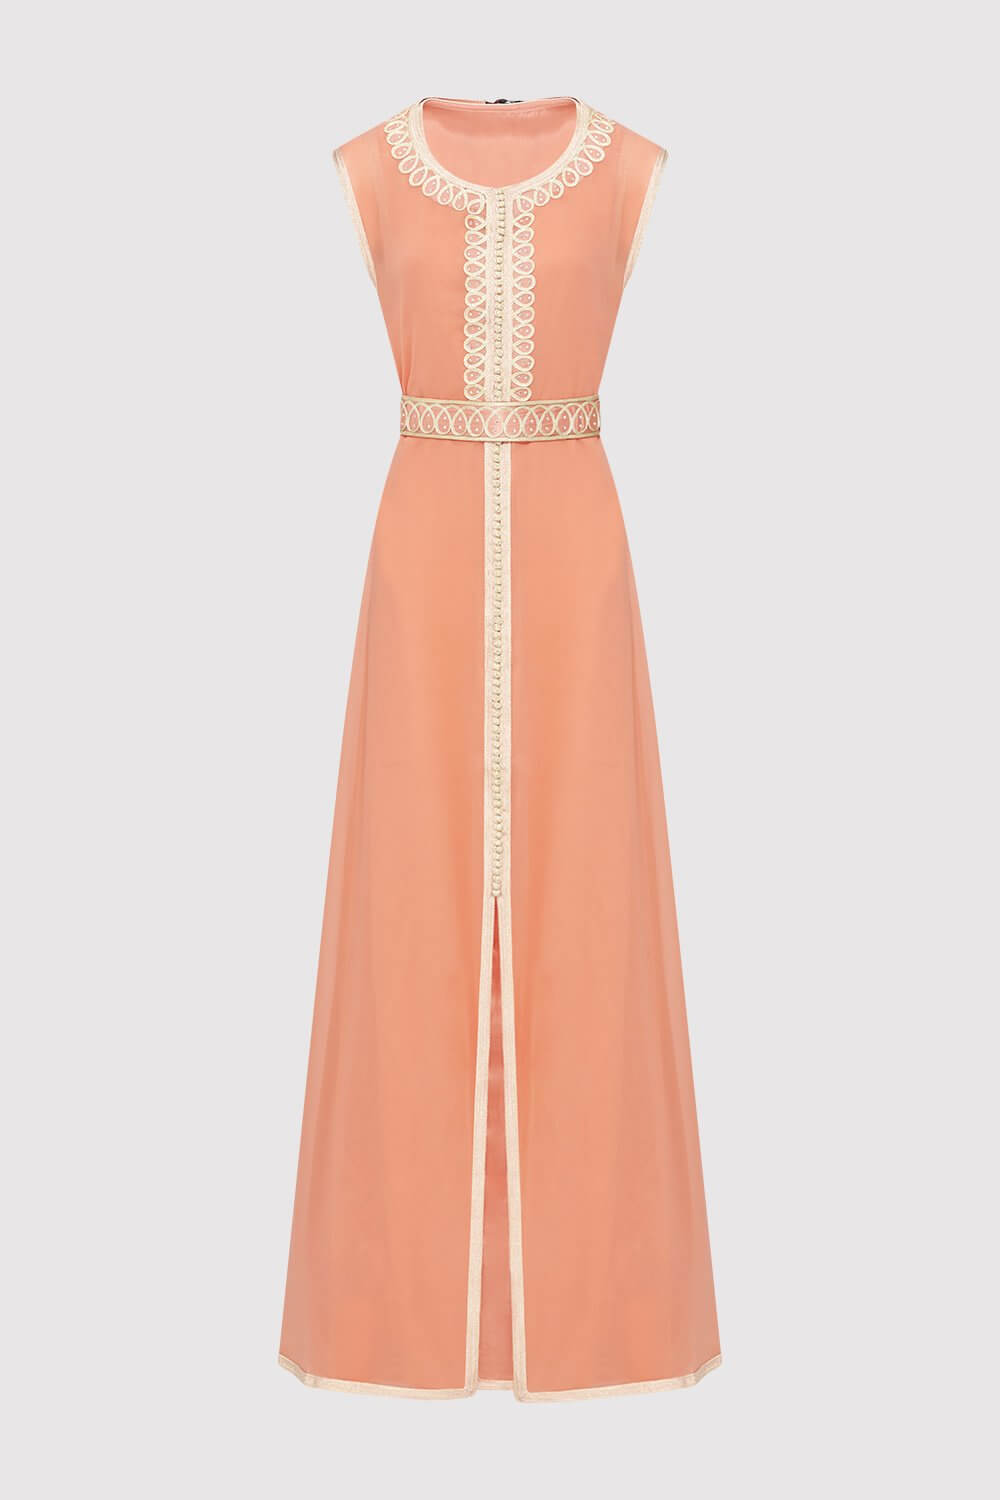 Lebssa Lamis Embroidered Sleeveless High Neck Occasion Wear Maxi Dress and Belt in Salmon